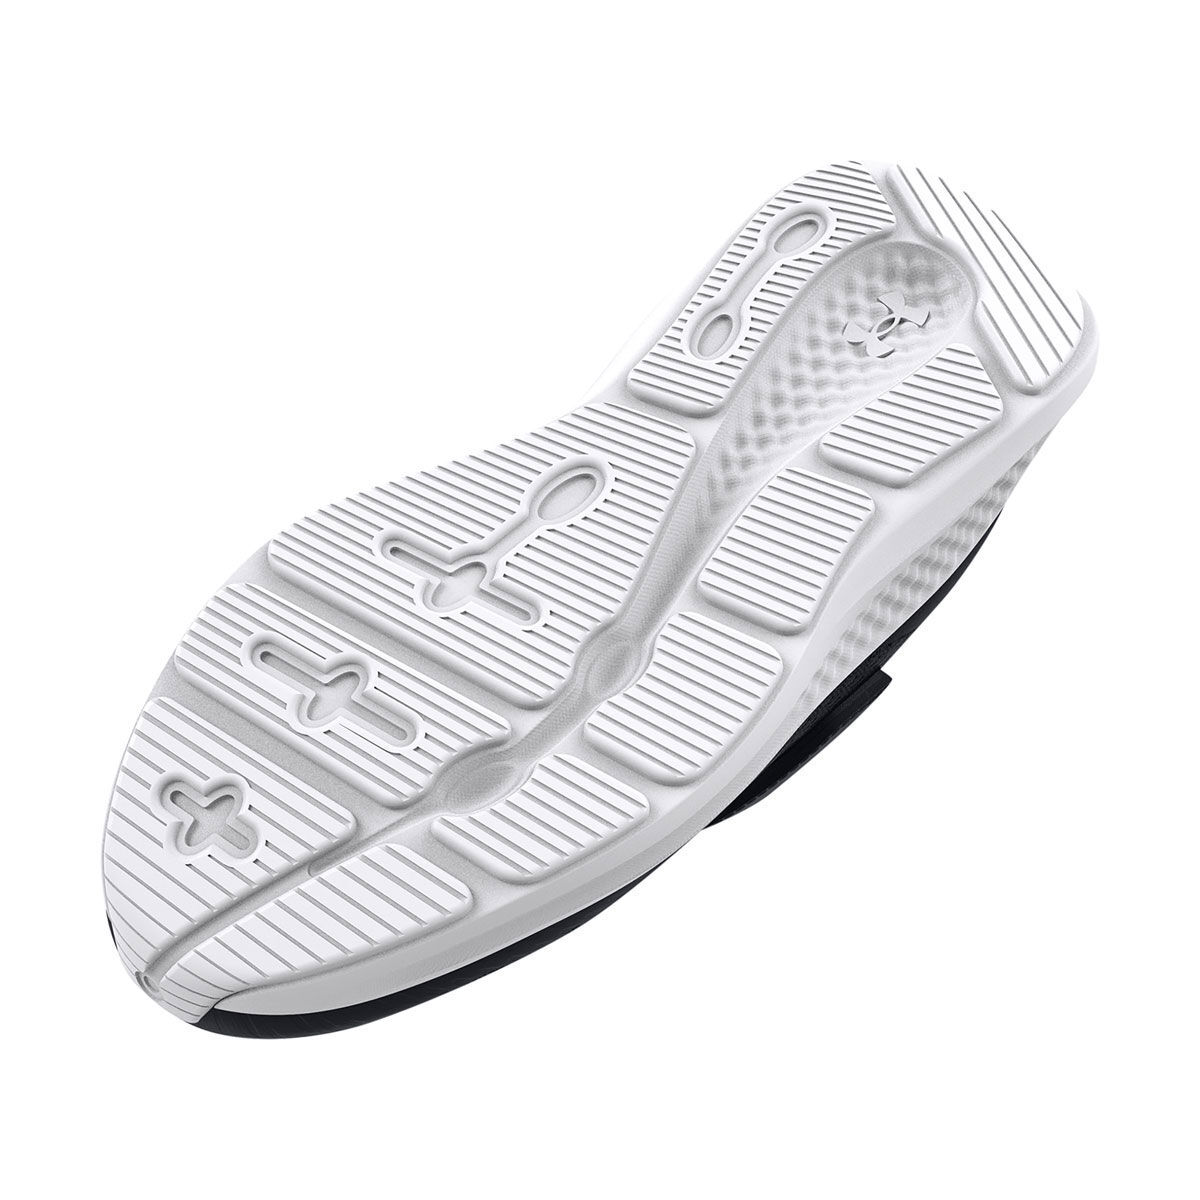 Order Online UA Project Rock 3 Slide From Under Armour India